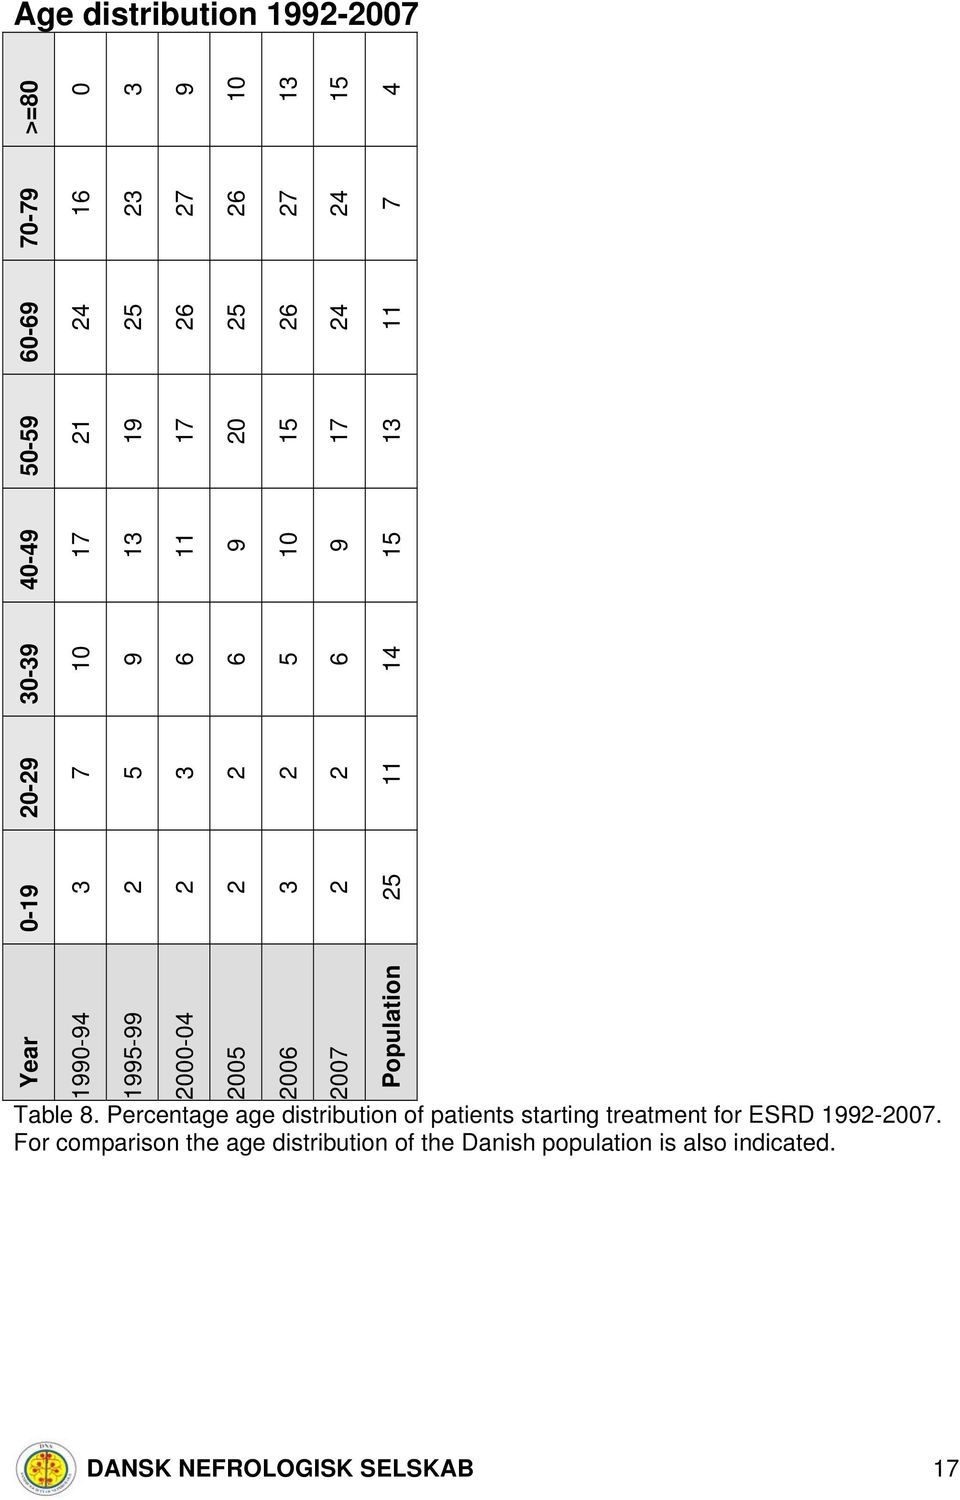 8. Percentage age distribution of patients starting treatment for ESRD 99-7.